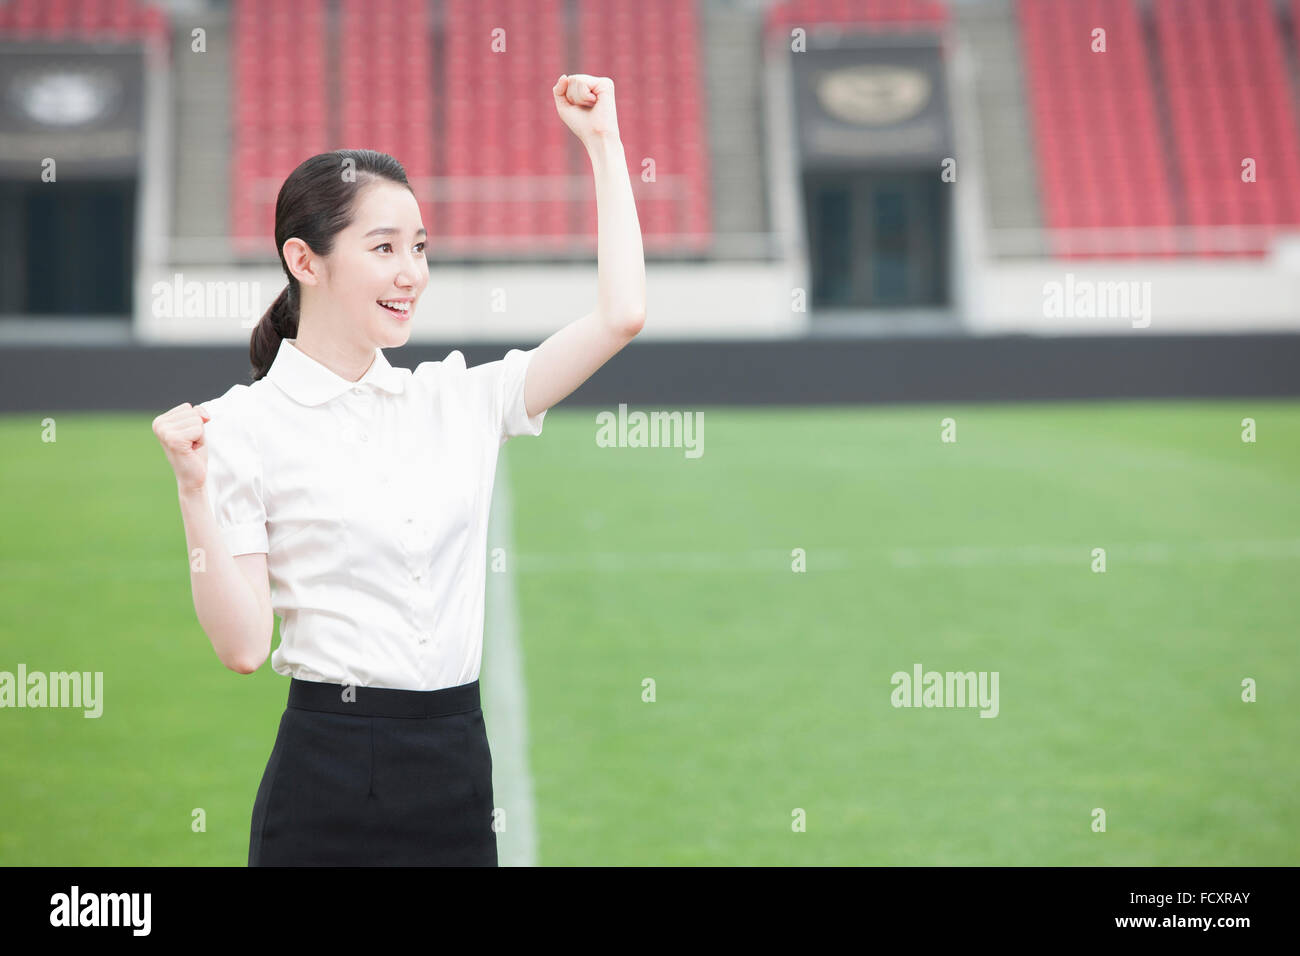 Portrait of woman in suit cheering at stadium Banque D'Images